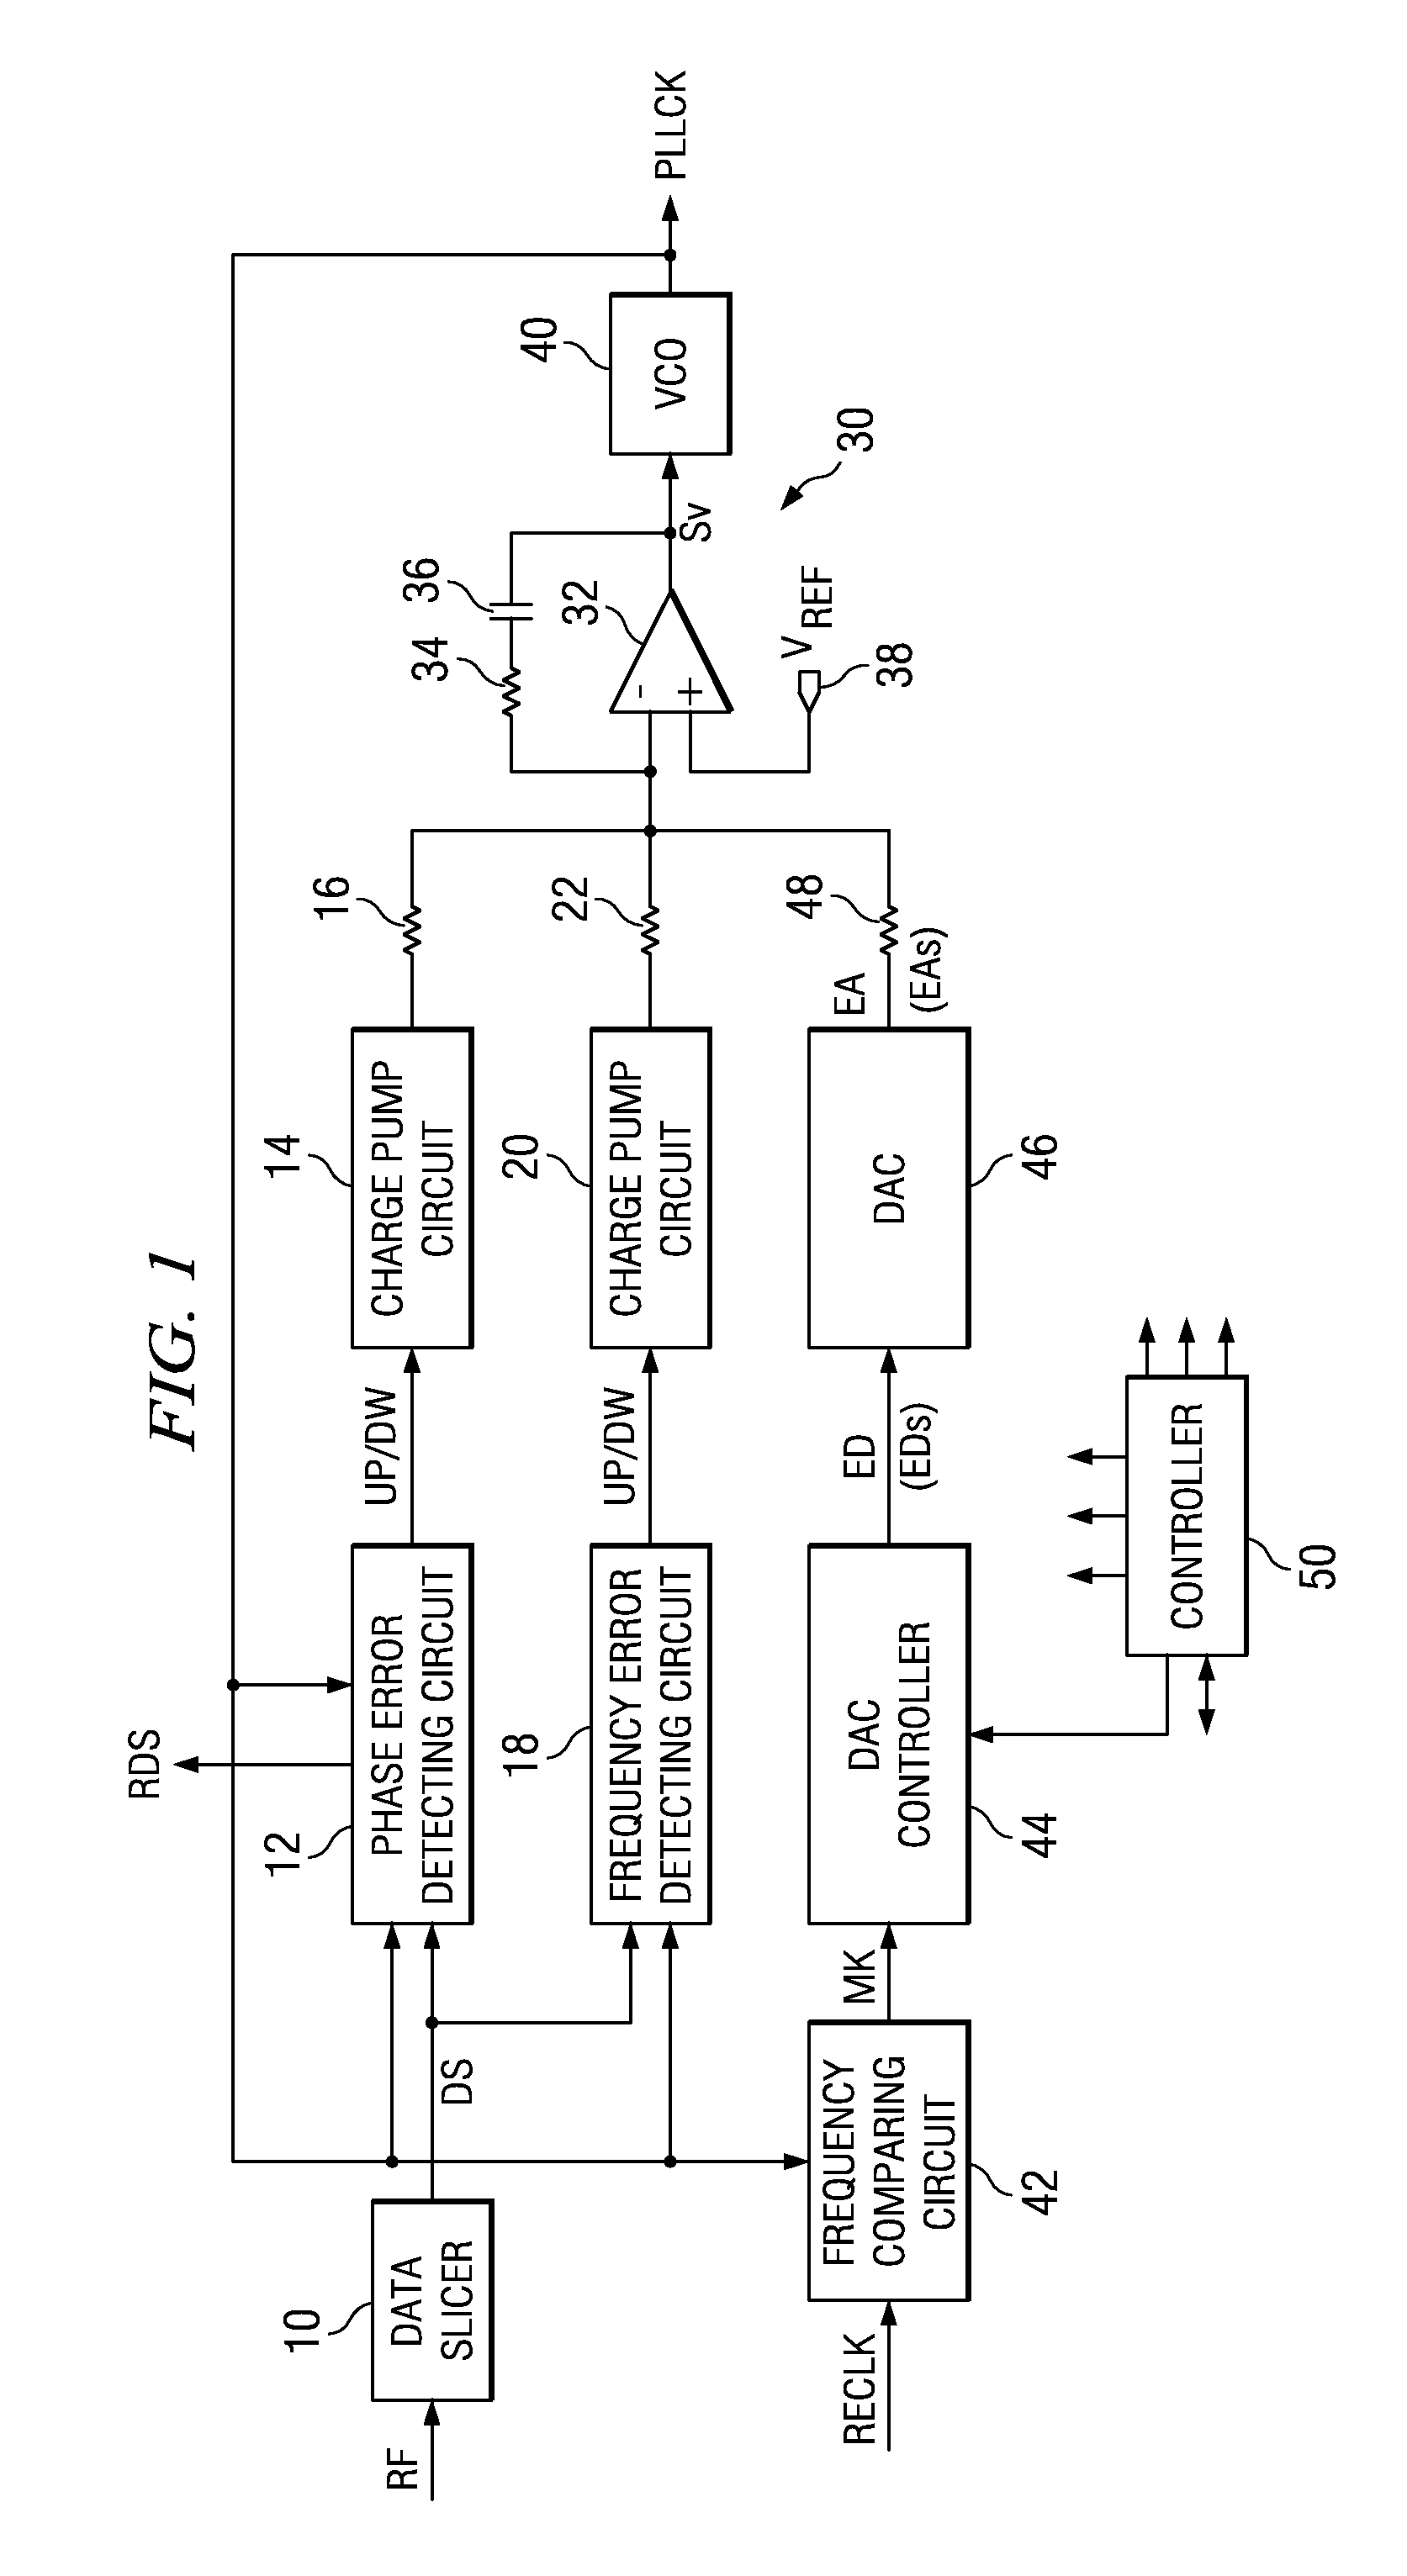 Phase-locked loop circuit having correction for active filter offset